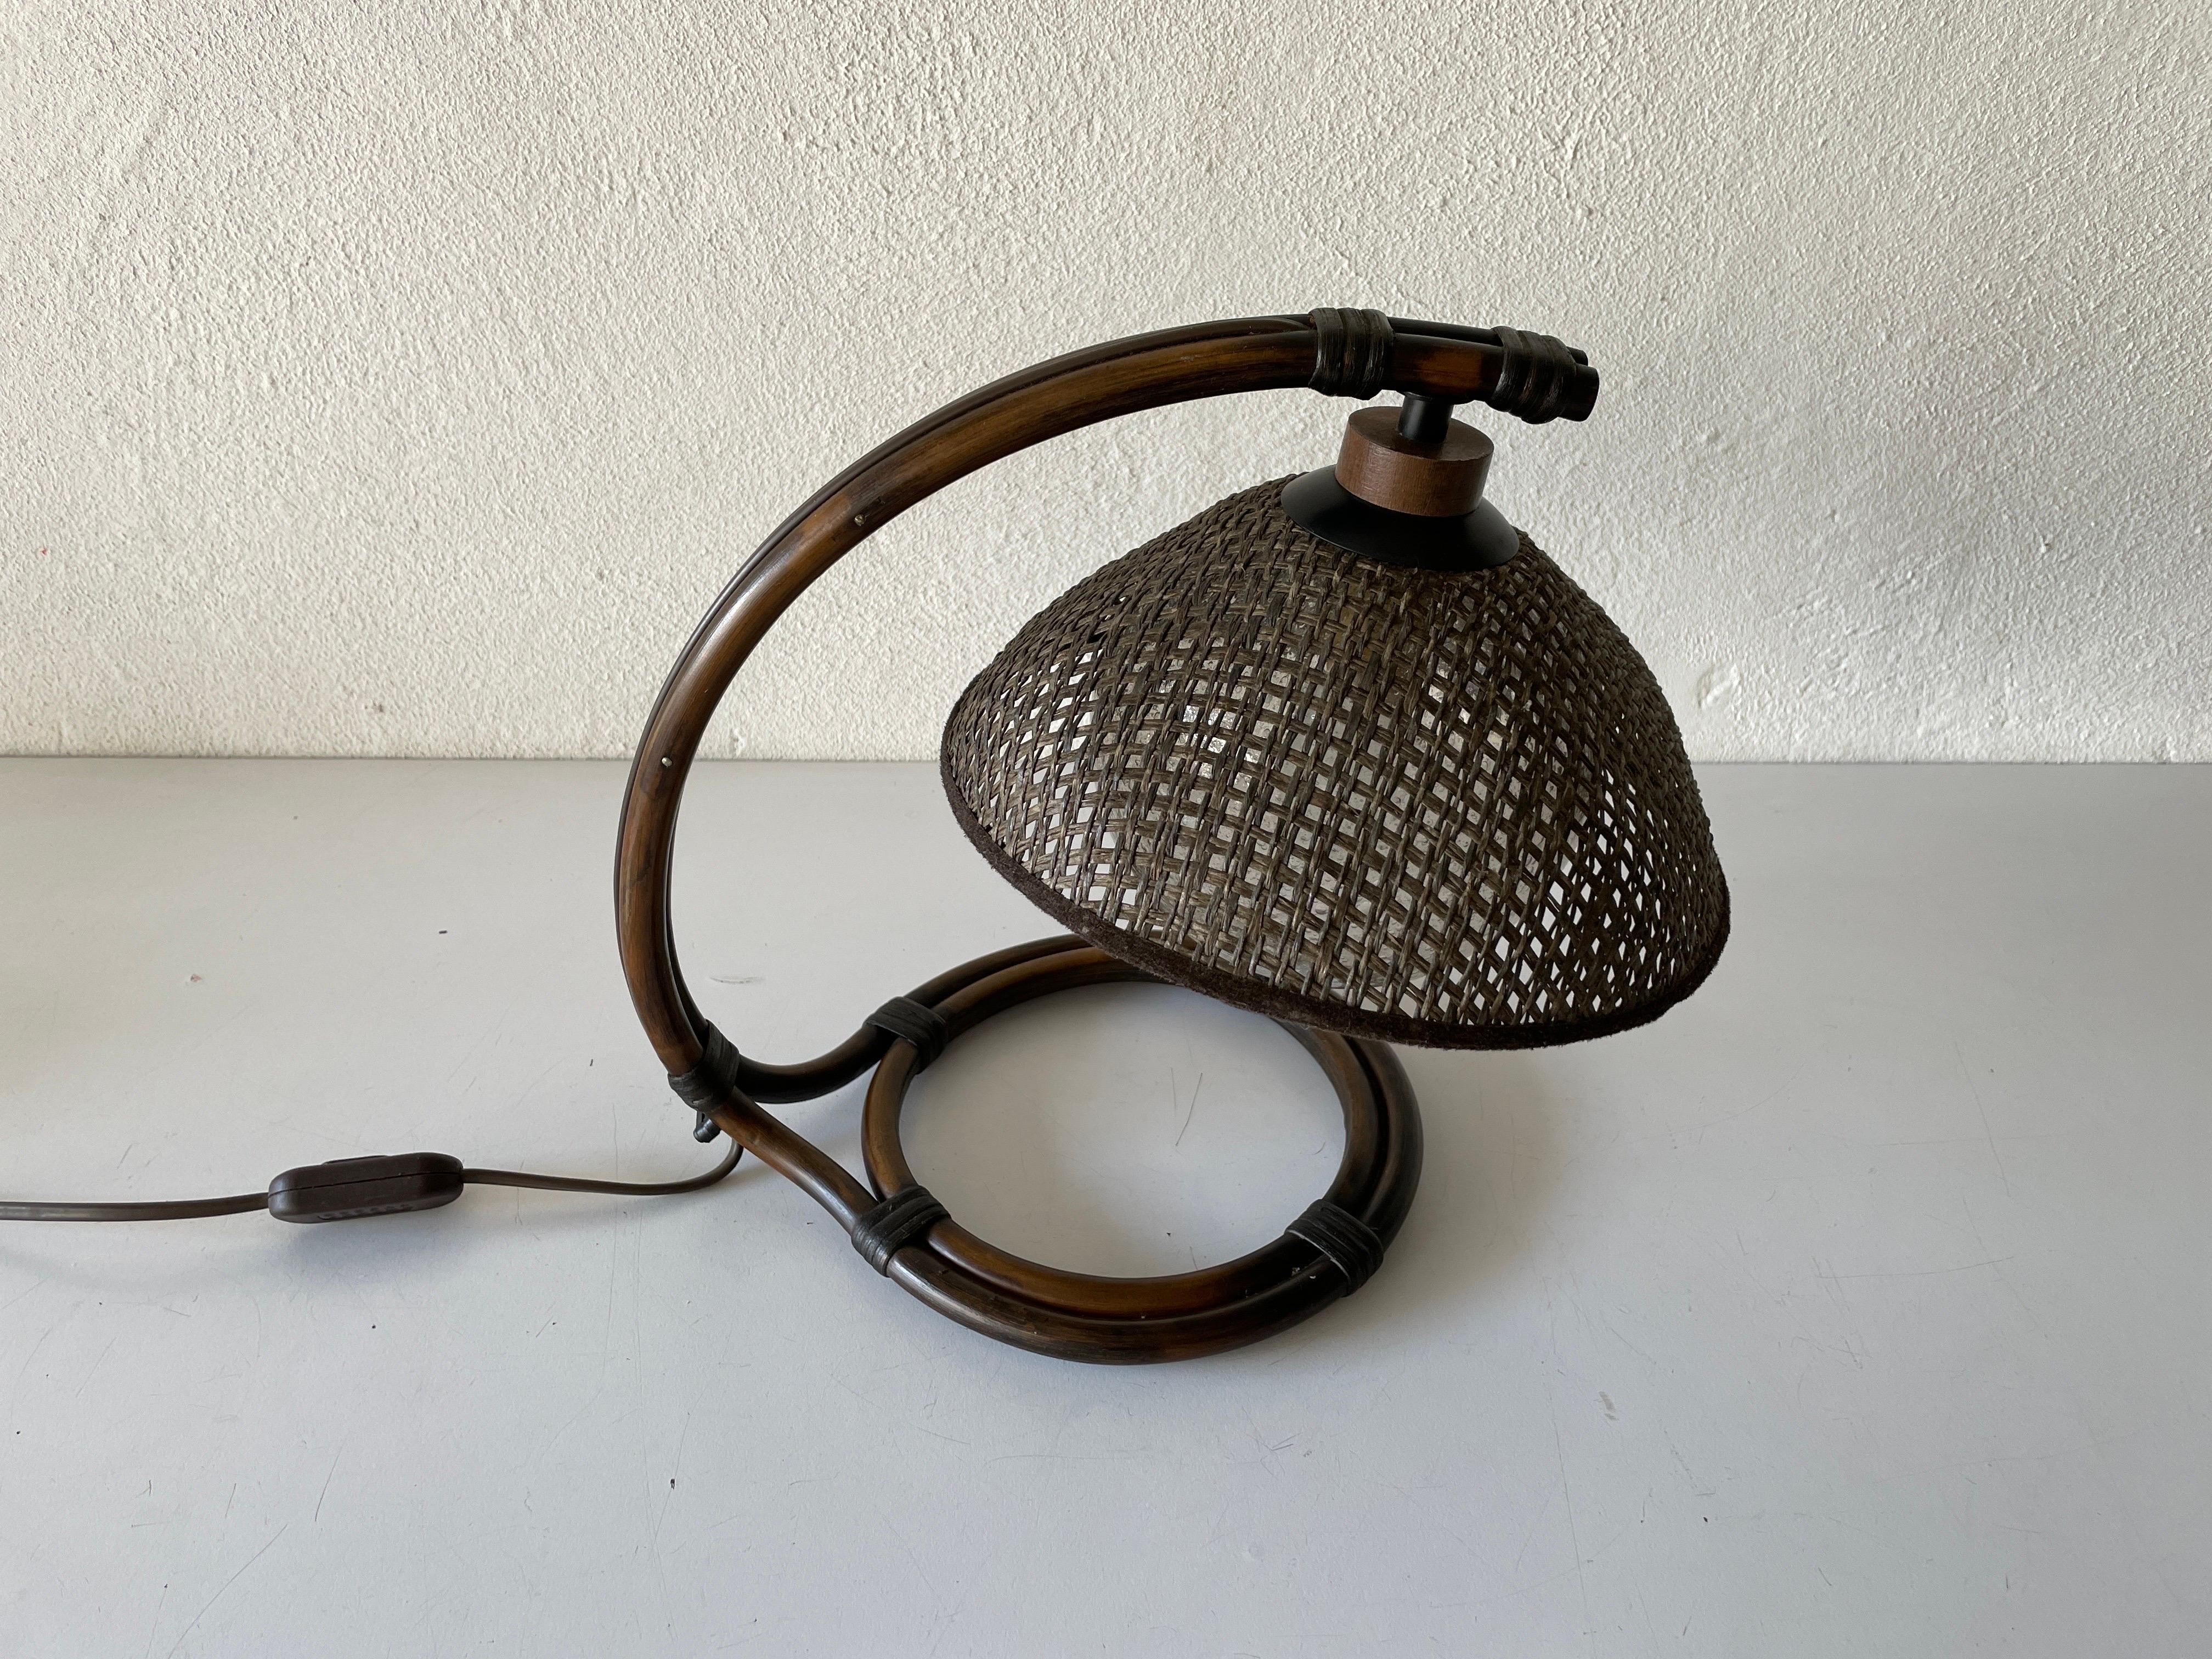 Rare Bamboo & Wicker Bedside Lamp Air Bubble Glass by Temde, 1960s, Switzerland In Excellent Condition For Sale In Hagenbach, DE